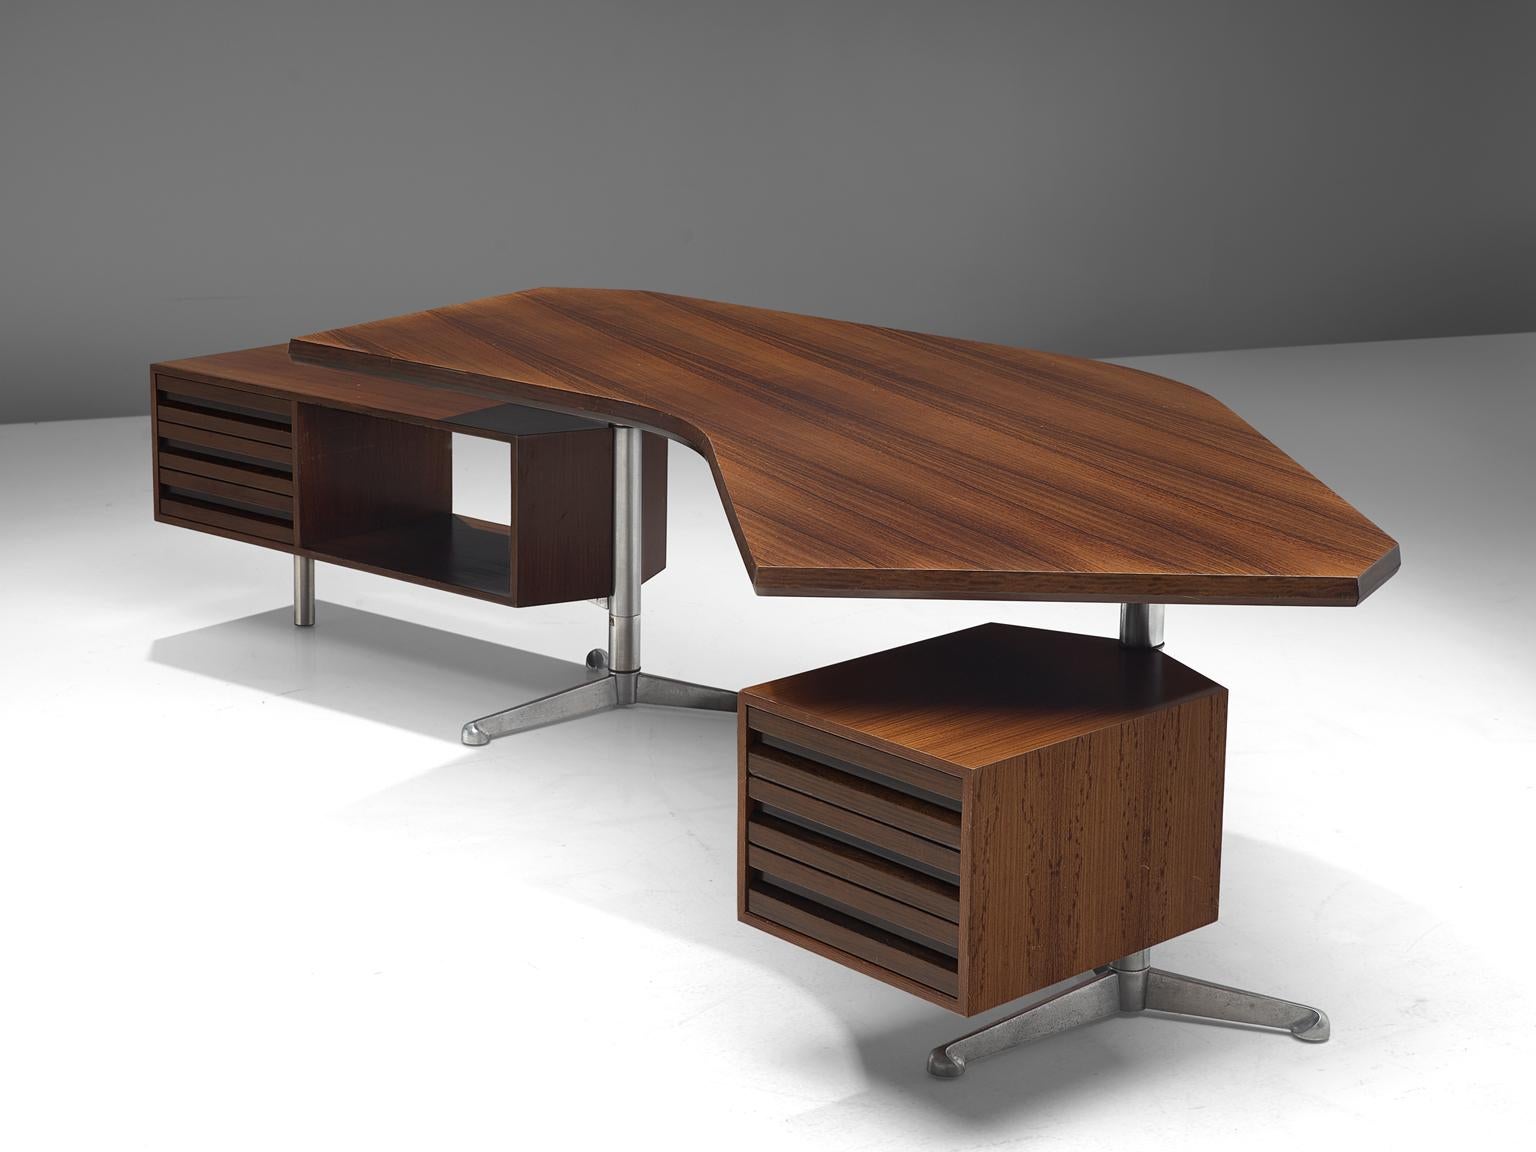 Osvaldo Borsani for Tecno, desk T-96 'Boomerang', rosewood, metal, Italy 1956. 

This boomerang shaped desk is designed by Osvaldo Borsani. The two revolving cabinets are held in place by the characteristic stainless steel tripods. The top has the